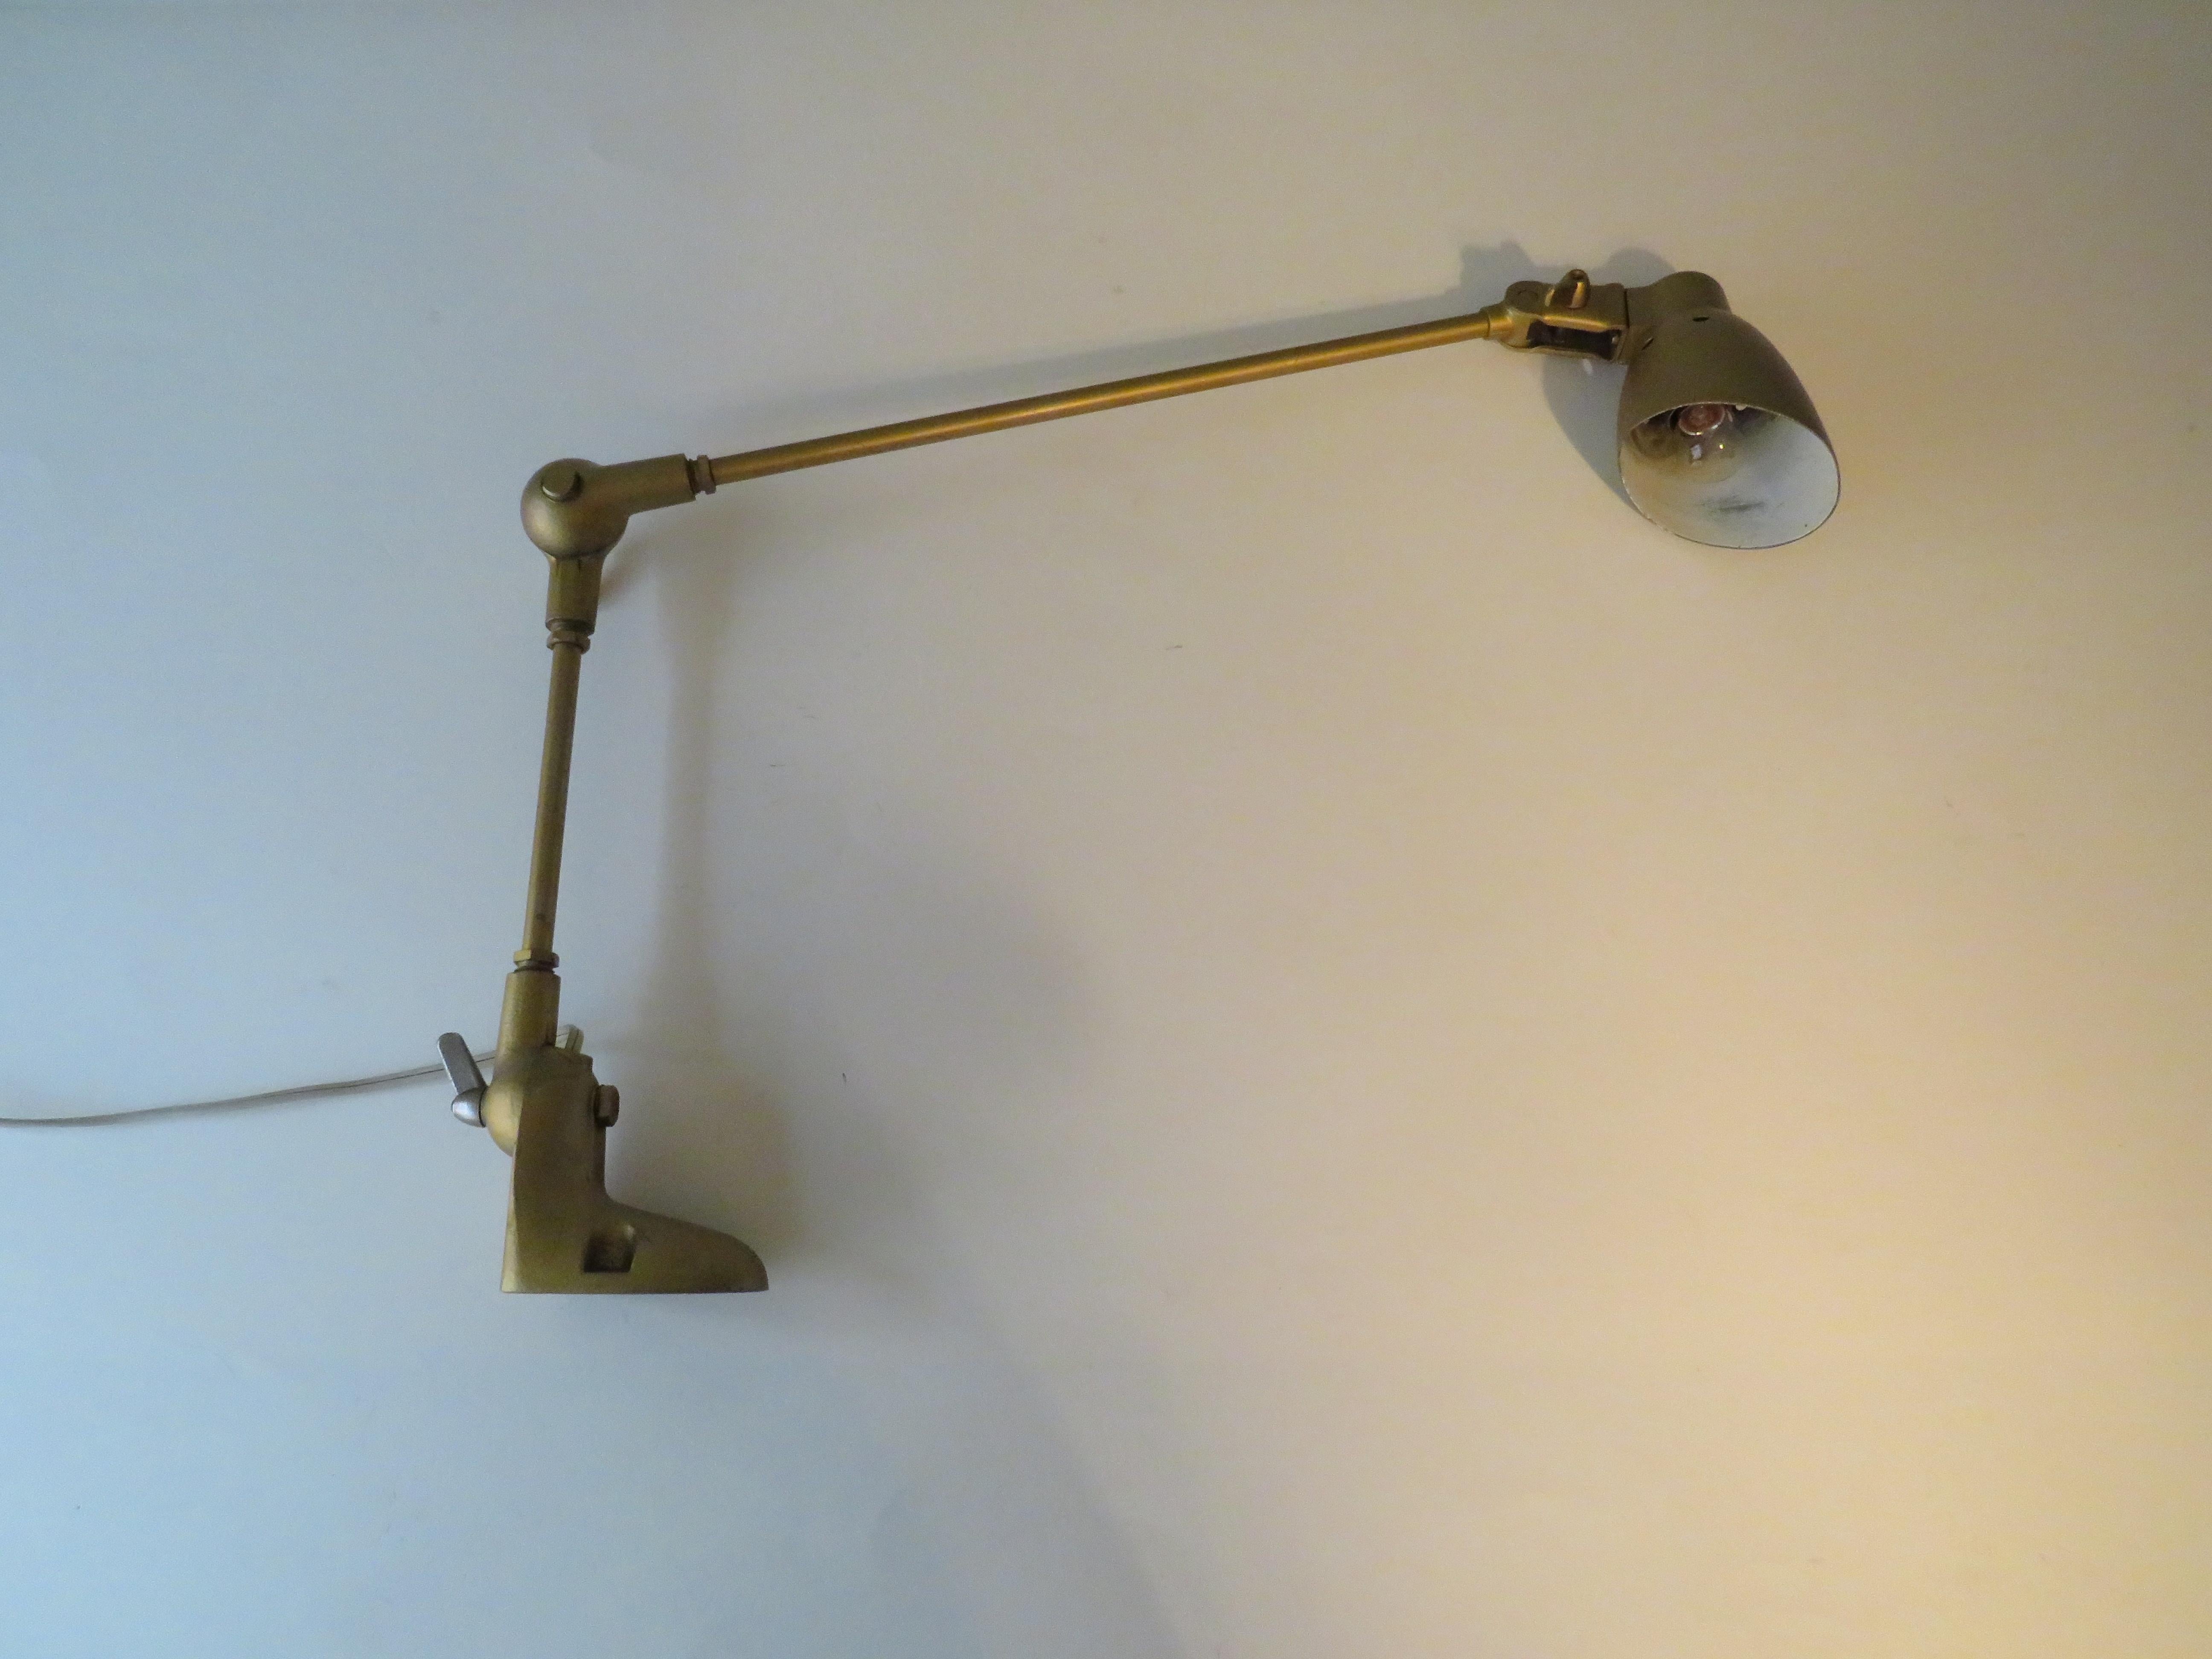 Industrial lamp by Pfaff, sewing machine manufacturer Germany 1950.
The metal lamp is in a hammered gold-colored version, has 2 adjustable arms and the shade can also be positioned in different positions. The lamp can be mounted on a worktop or